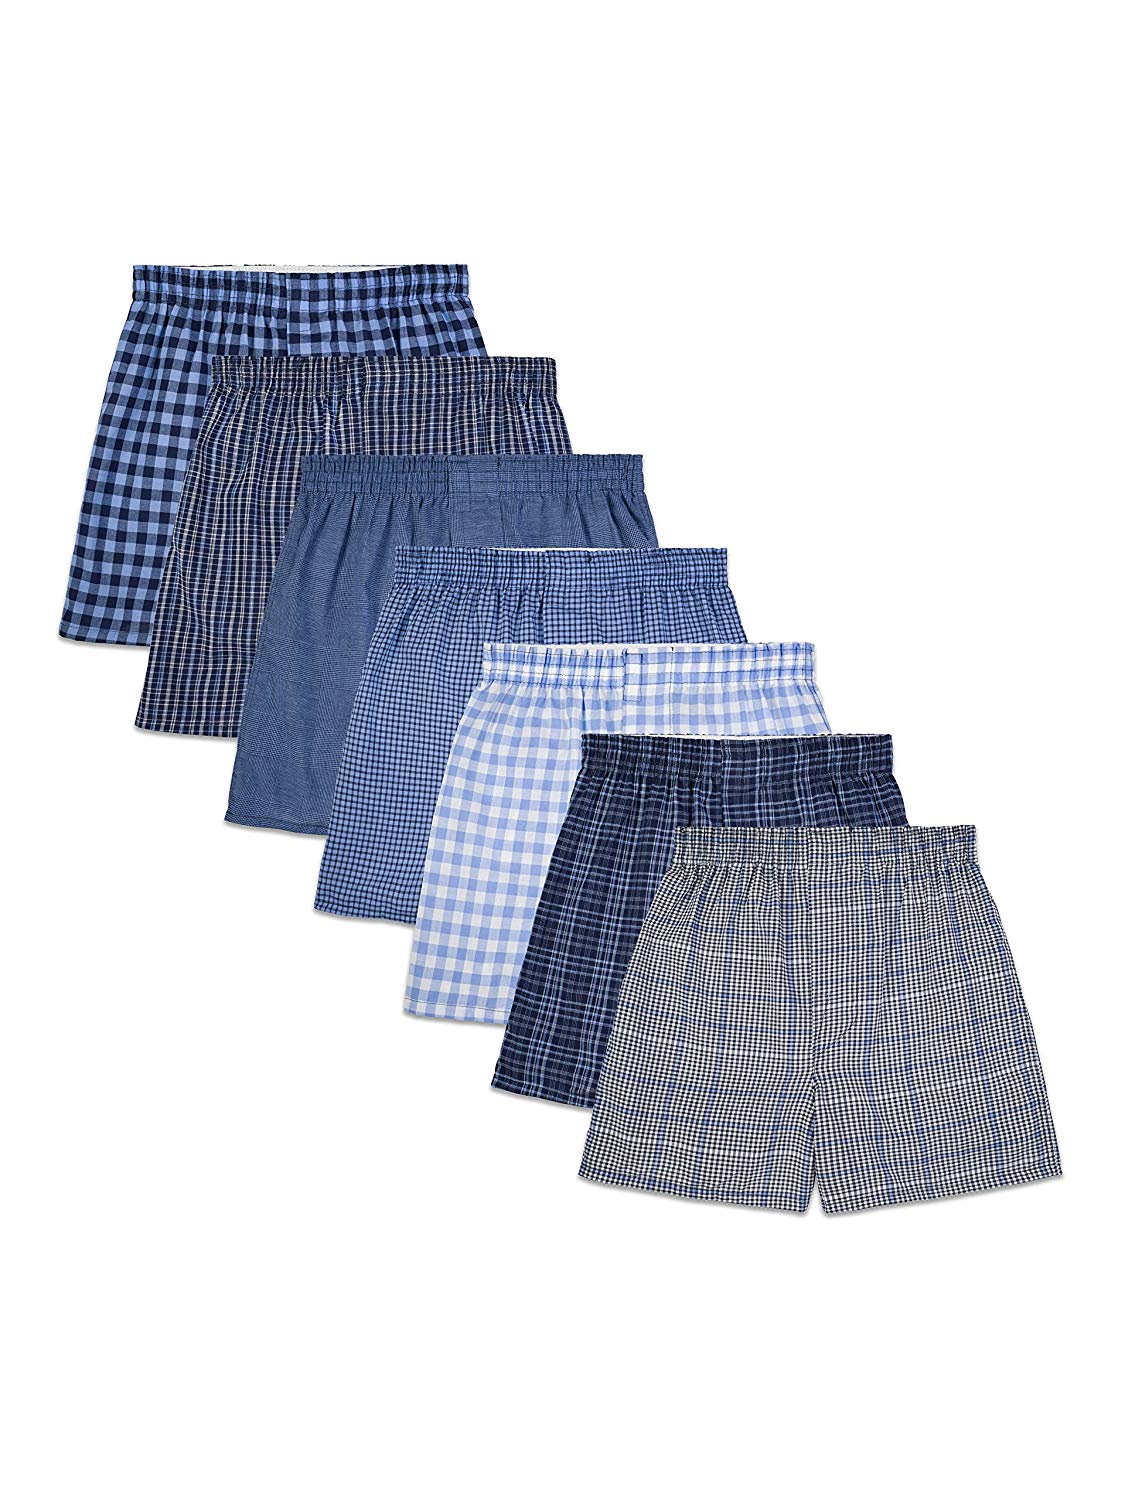 Fruit of the Loom Boys' Big Woven Boxer (Pack of 7),, Assorted Plaids ...